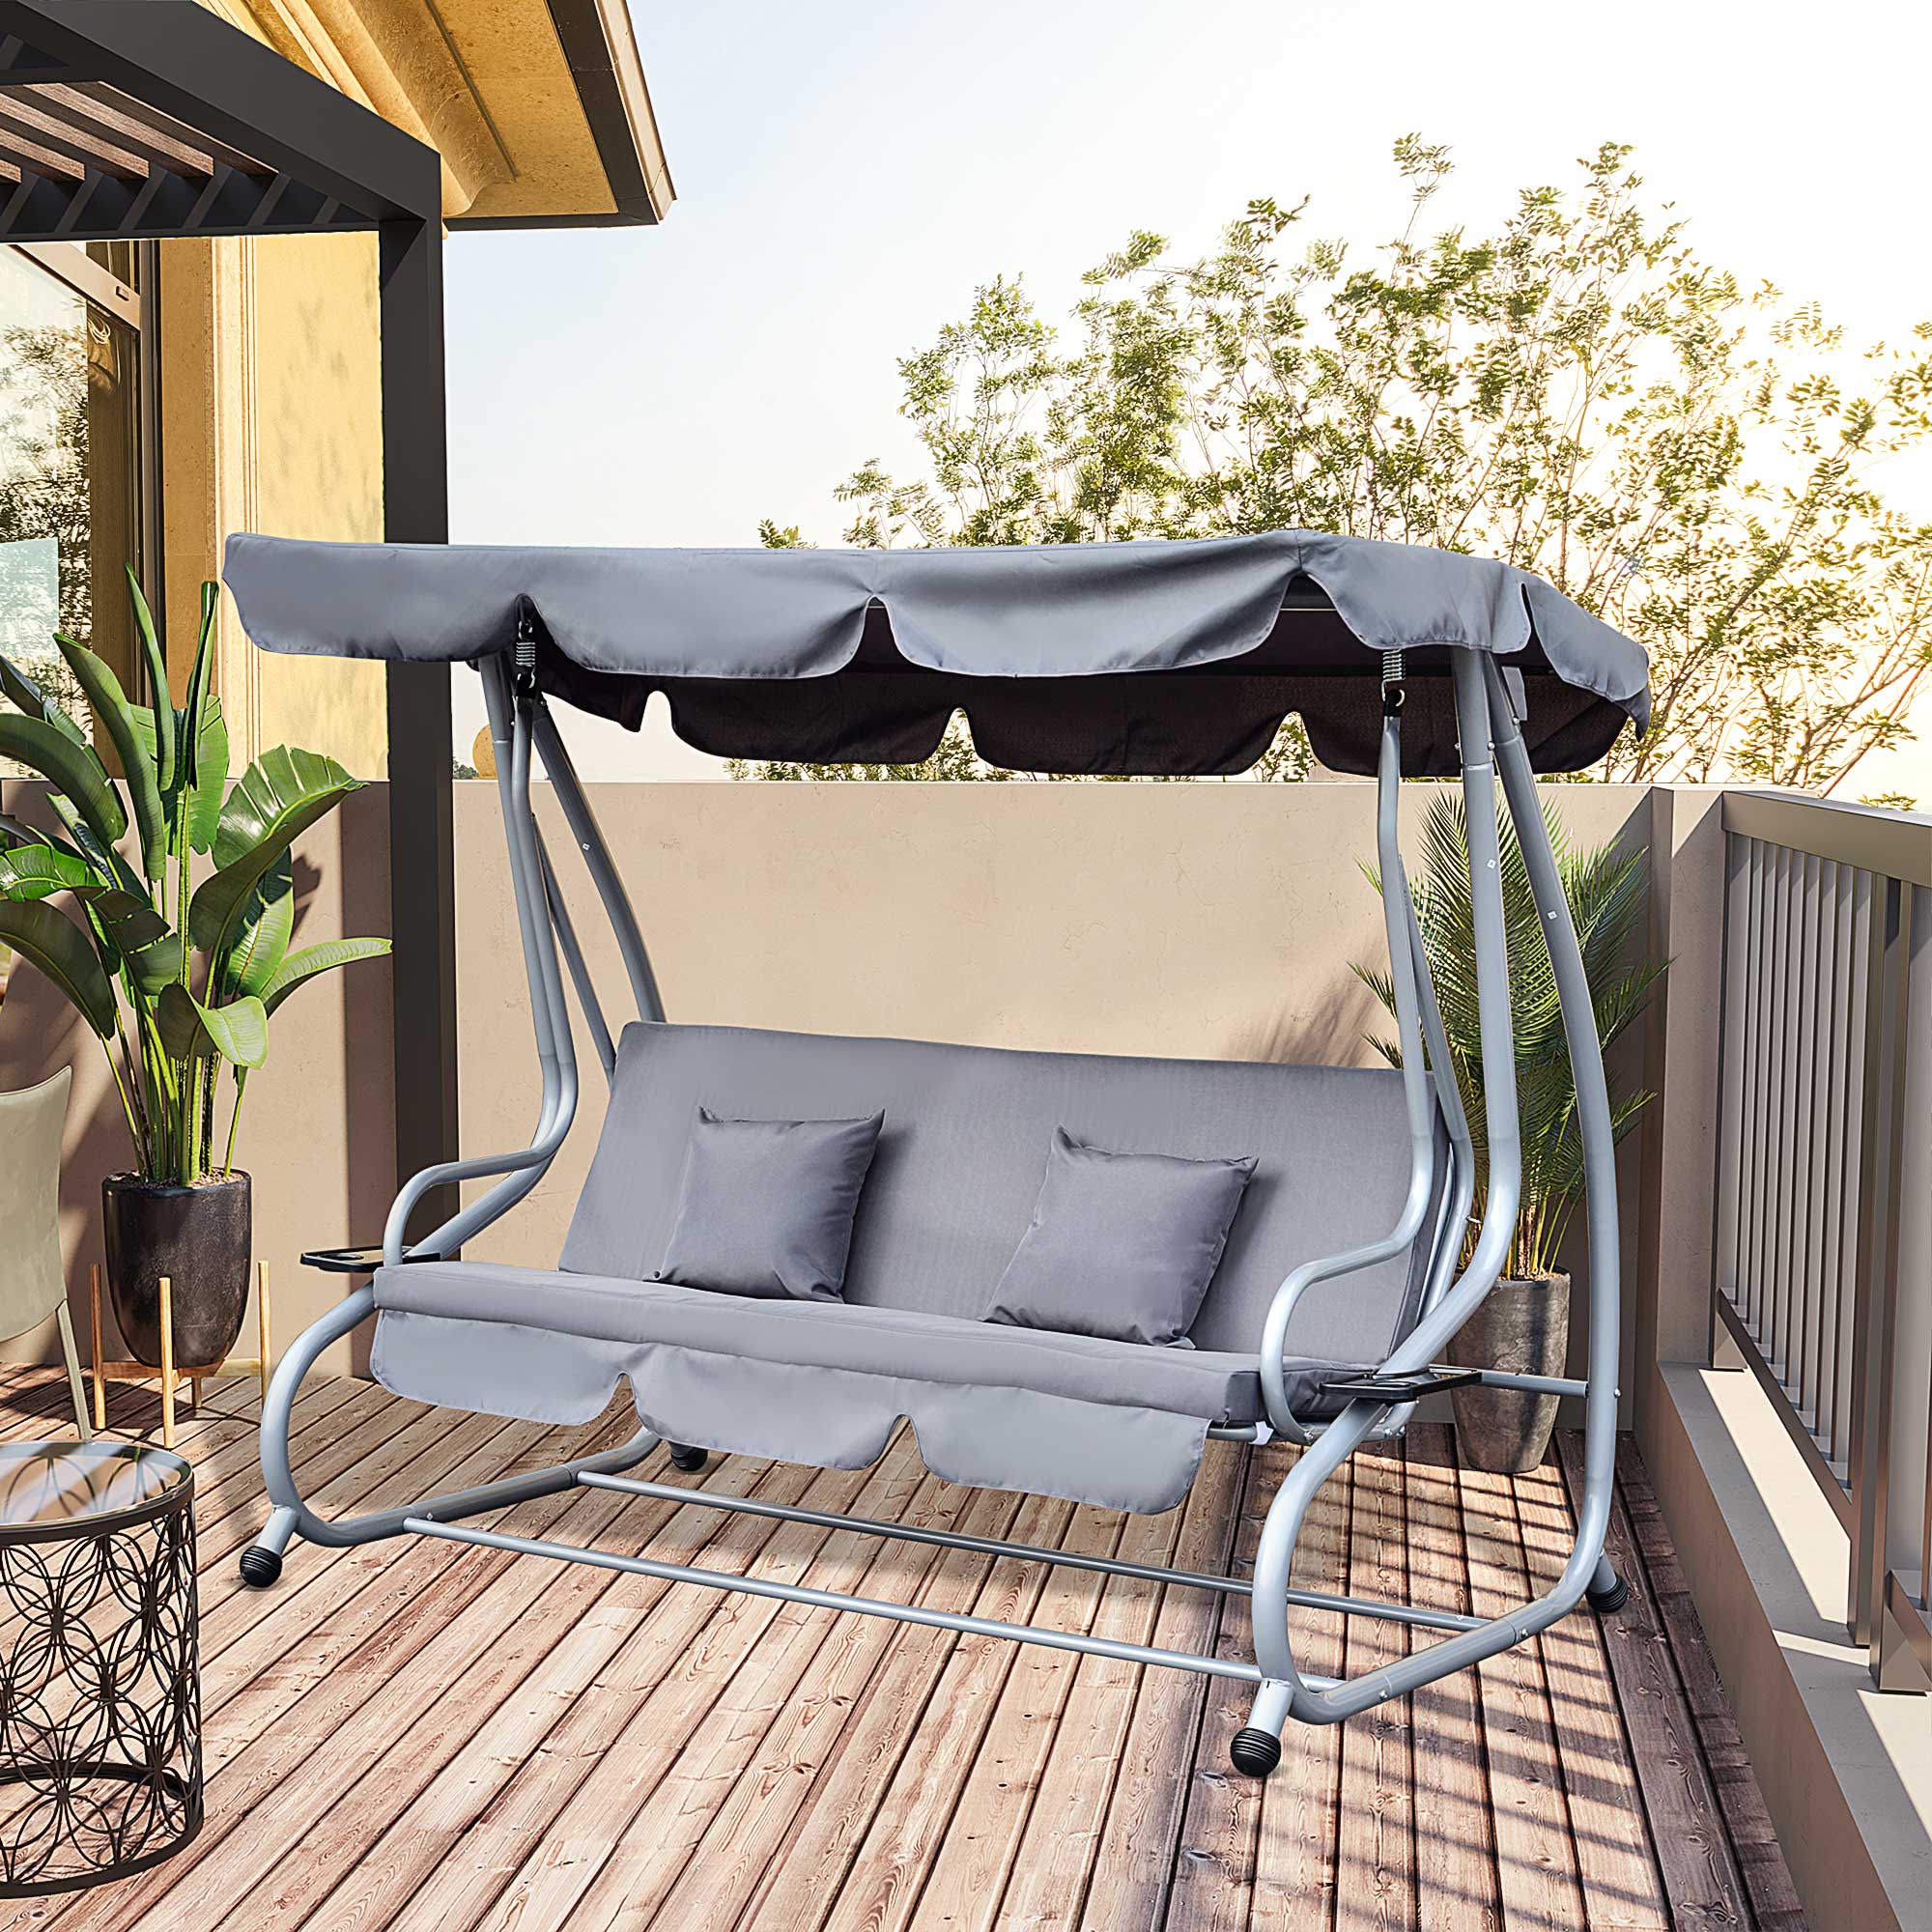 Outsunny 2-in-1 Garden Swing Seat Bed 3 Seater Swing Chair Hammock Bench Bed with Tilting Canopy and 2 Cushions, Grey - Inspirely